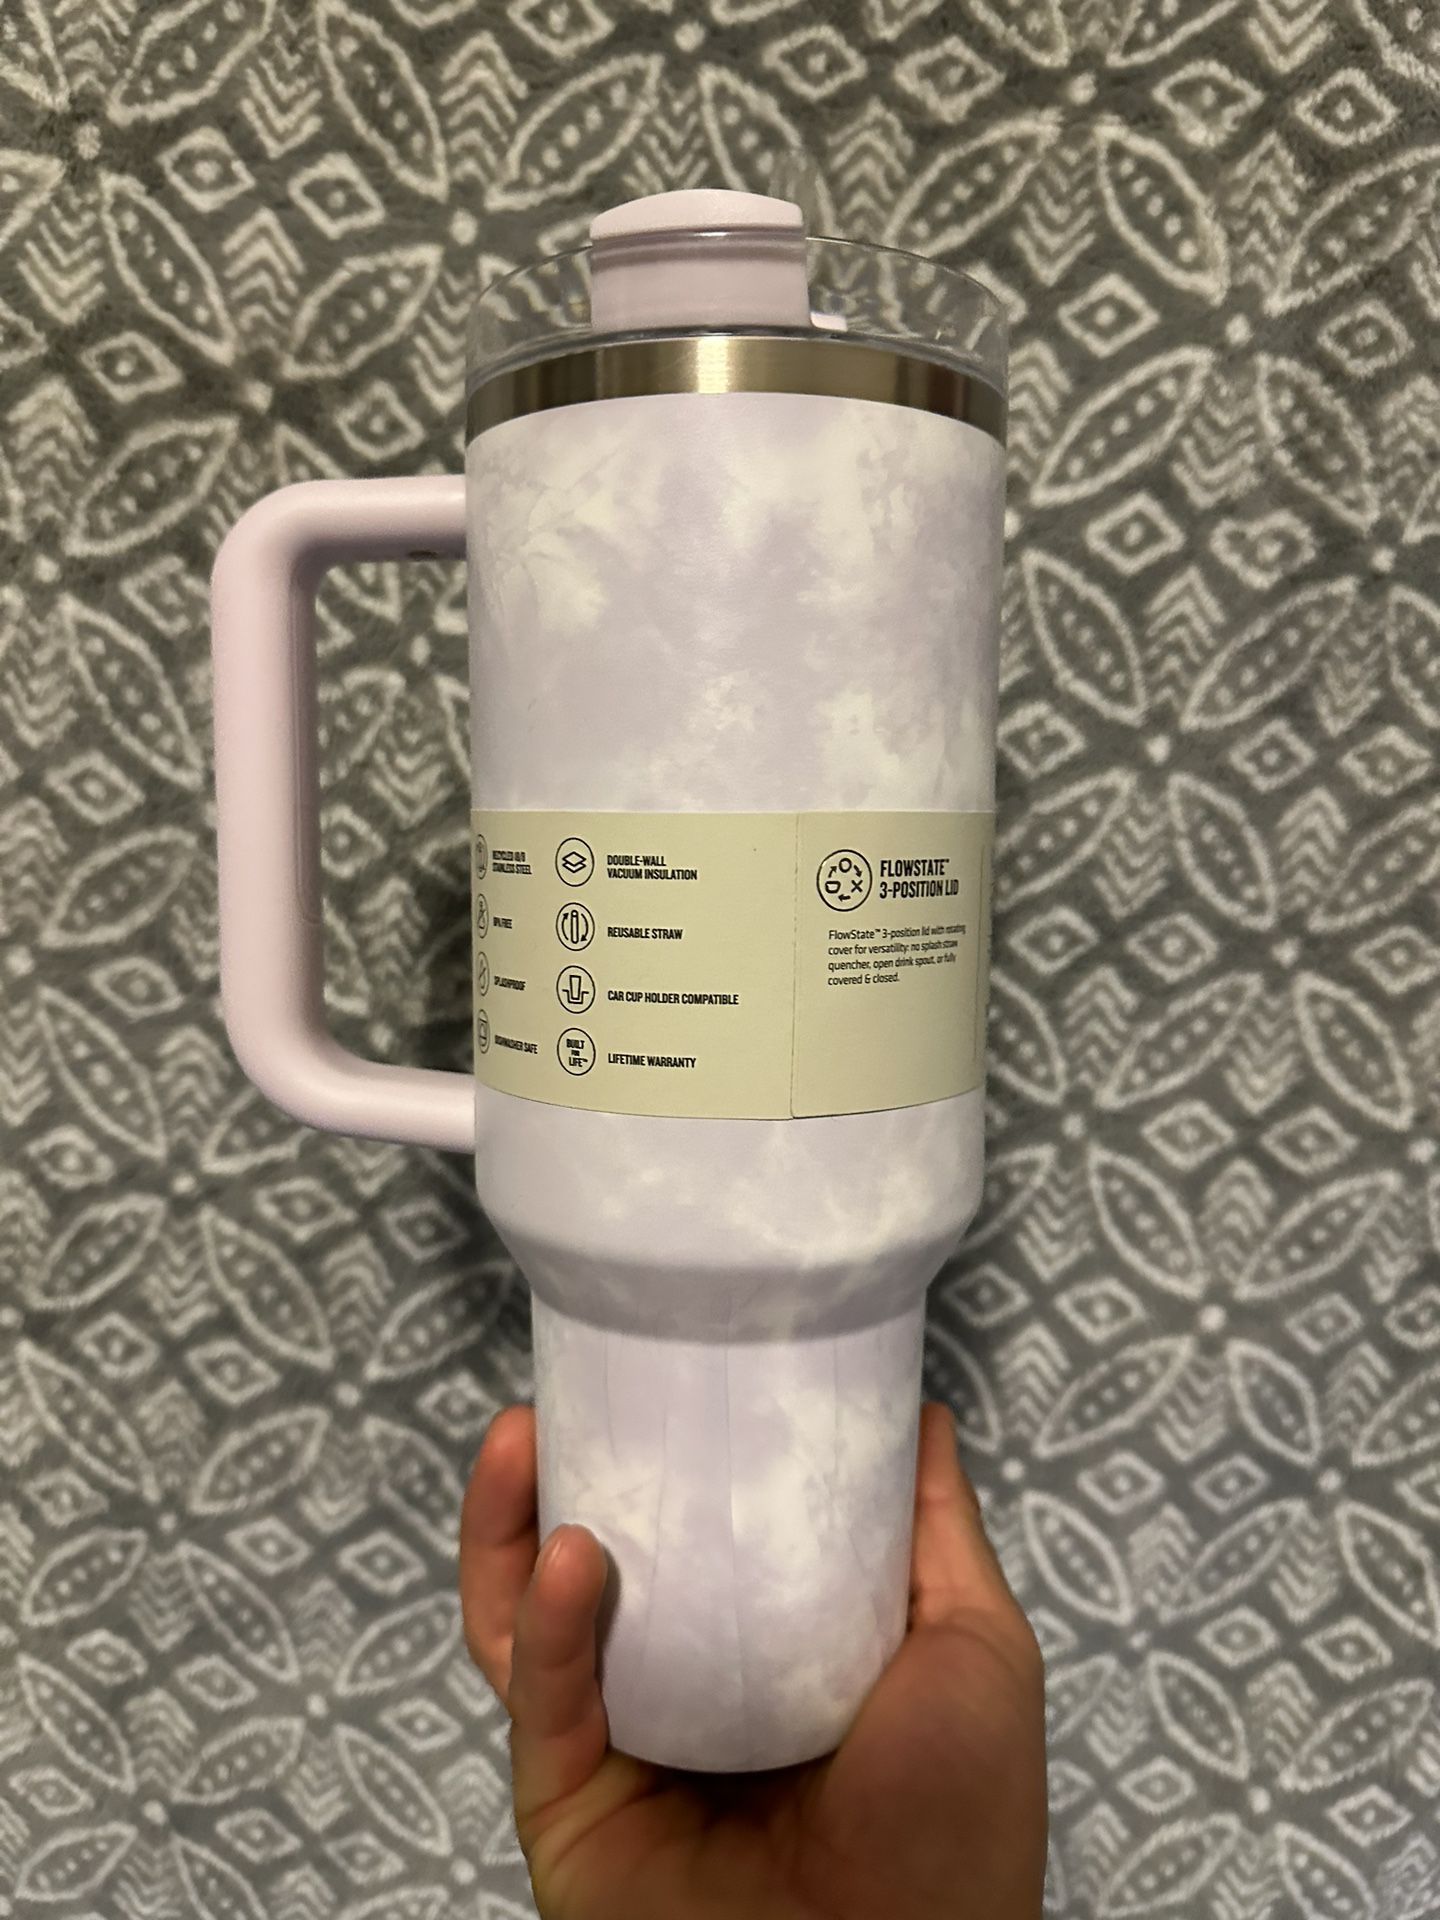 Tie Dye Lime Green Stanley 40 Oz Cup for Sale in Irvine, CA - OfferUp